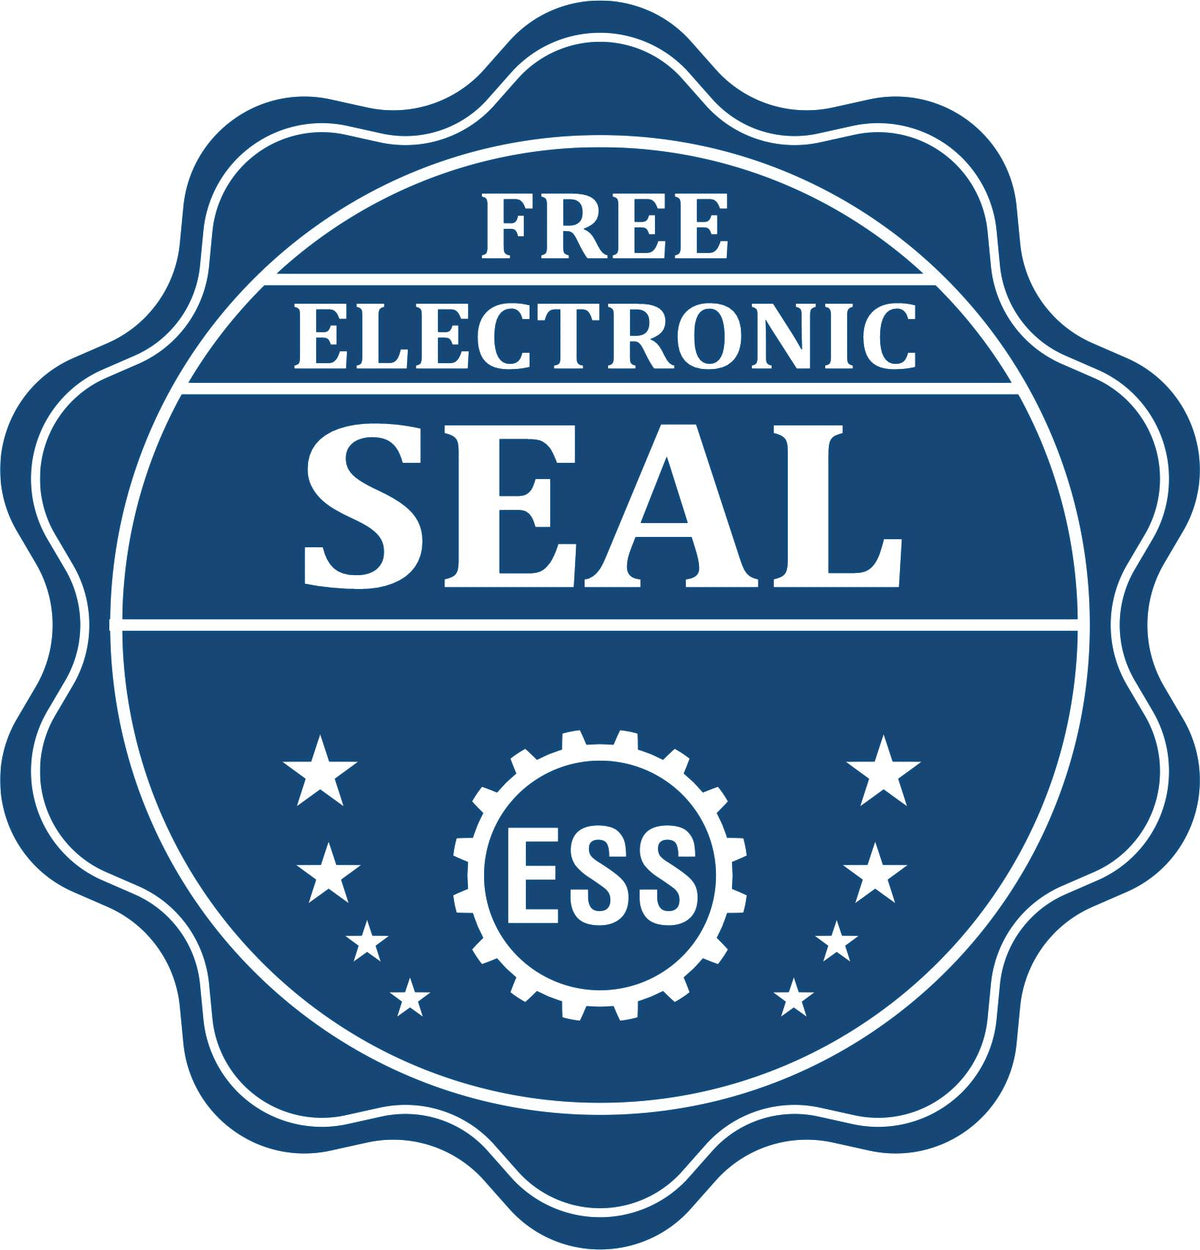 A badge showing a free electronic seal for the Gift Maryland Landscape Architect Seal with stars and the ESS gear on the emblem.